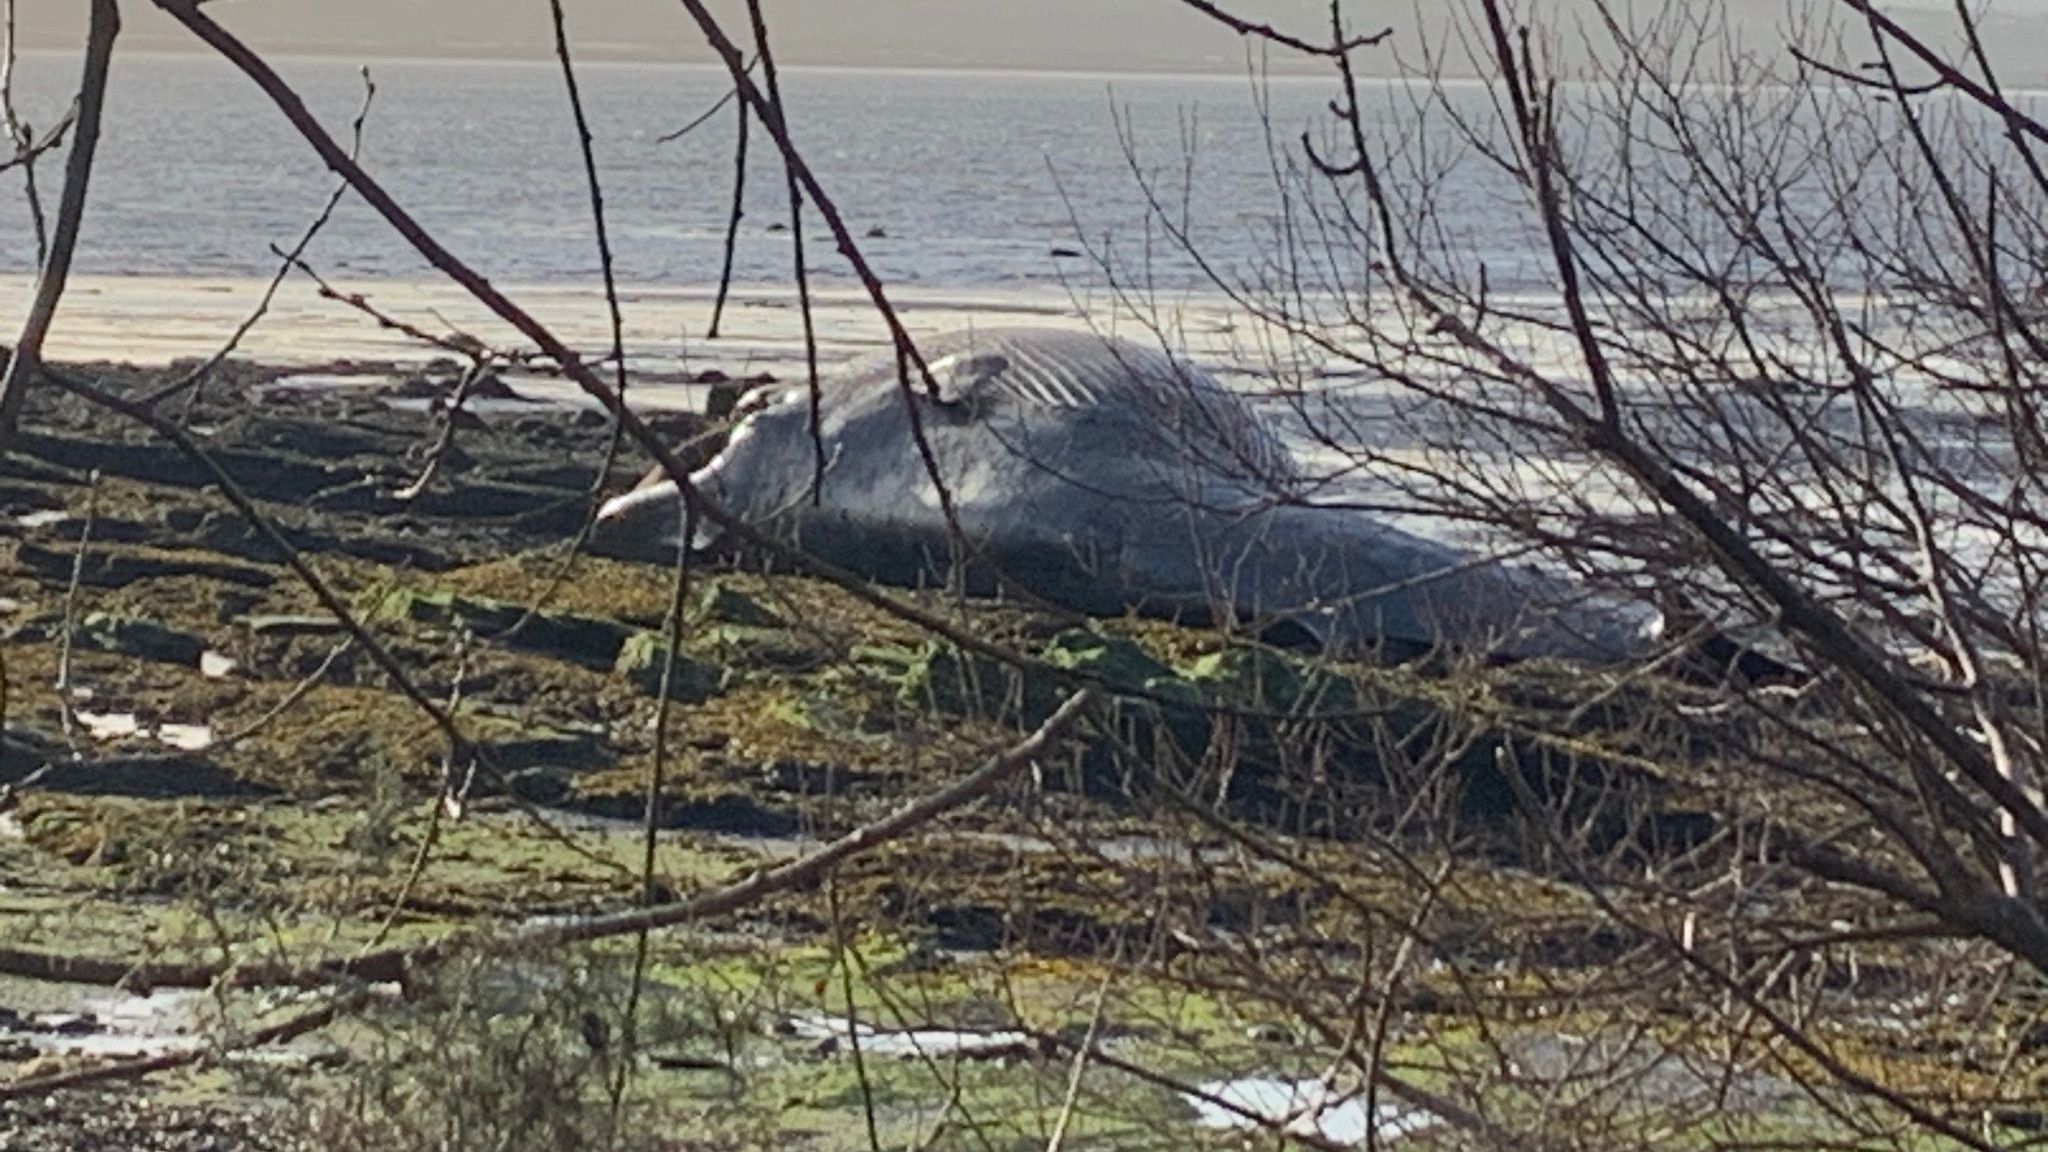 The whale was found near the village of Culross